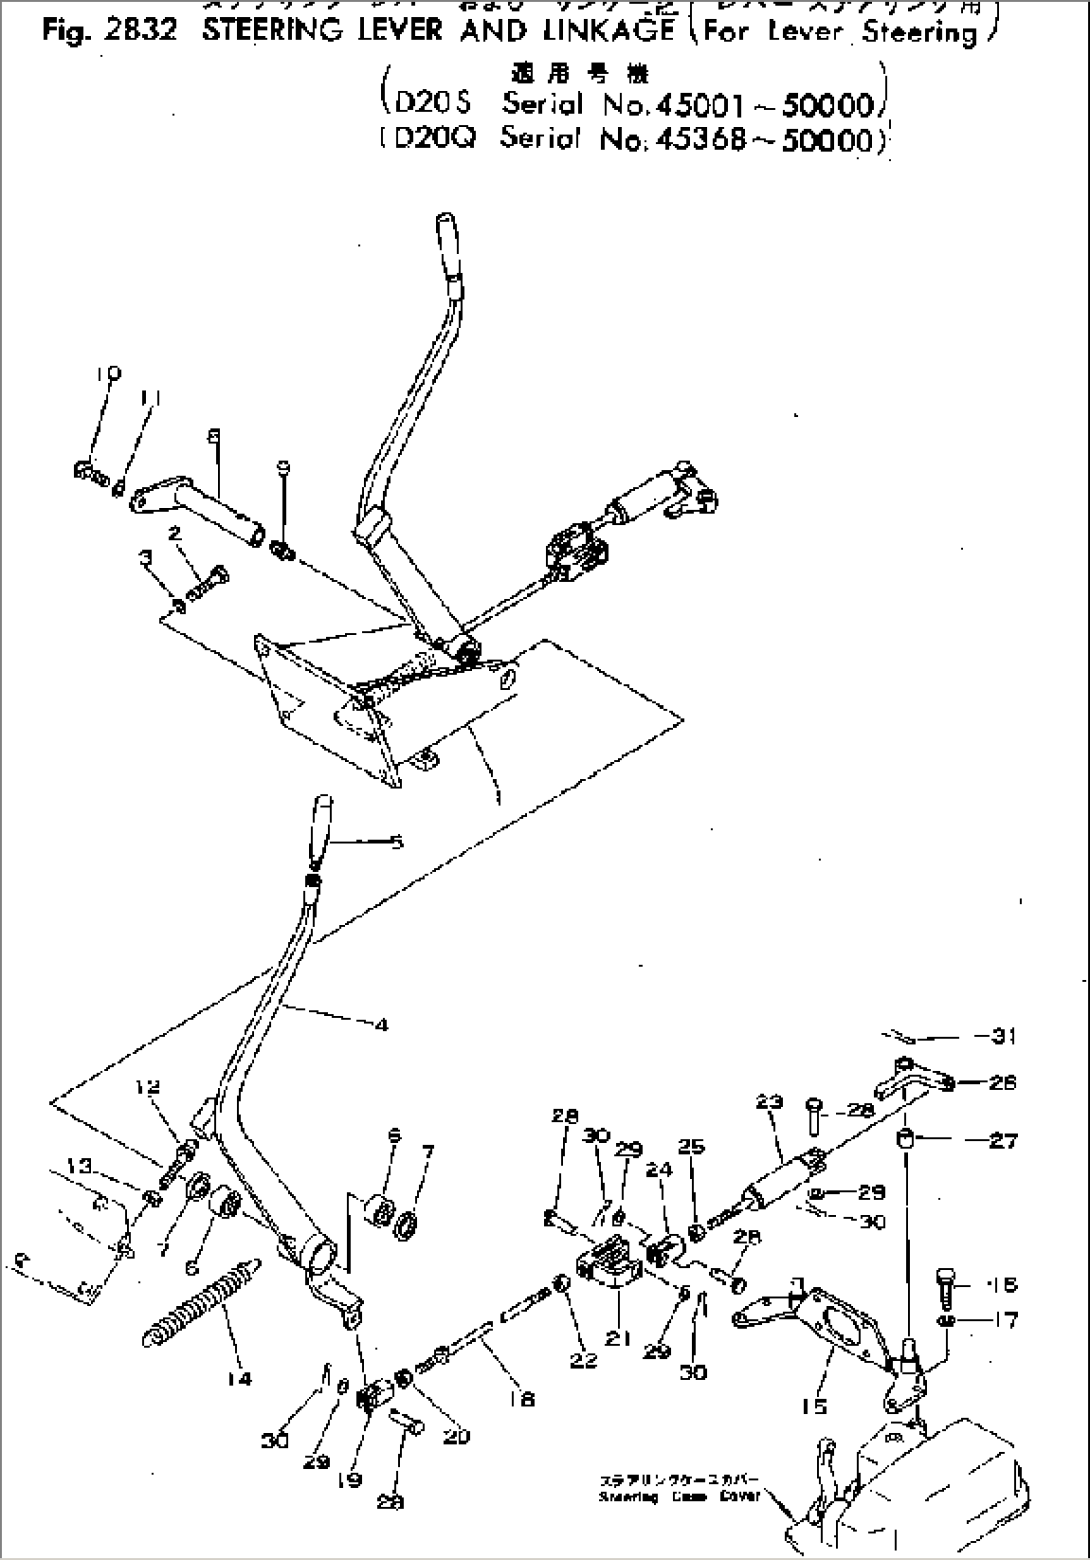 STEERING LEVER AND LINKAGE (FOR LEVER STEERING)(#45001-50000)